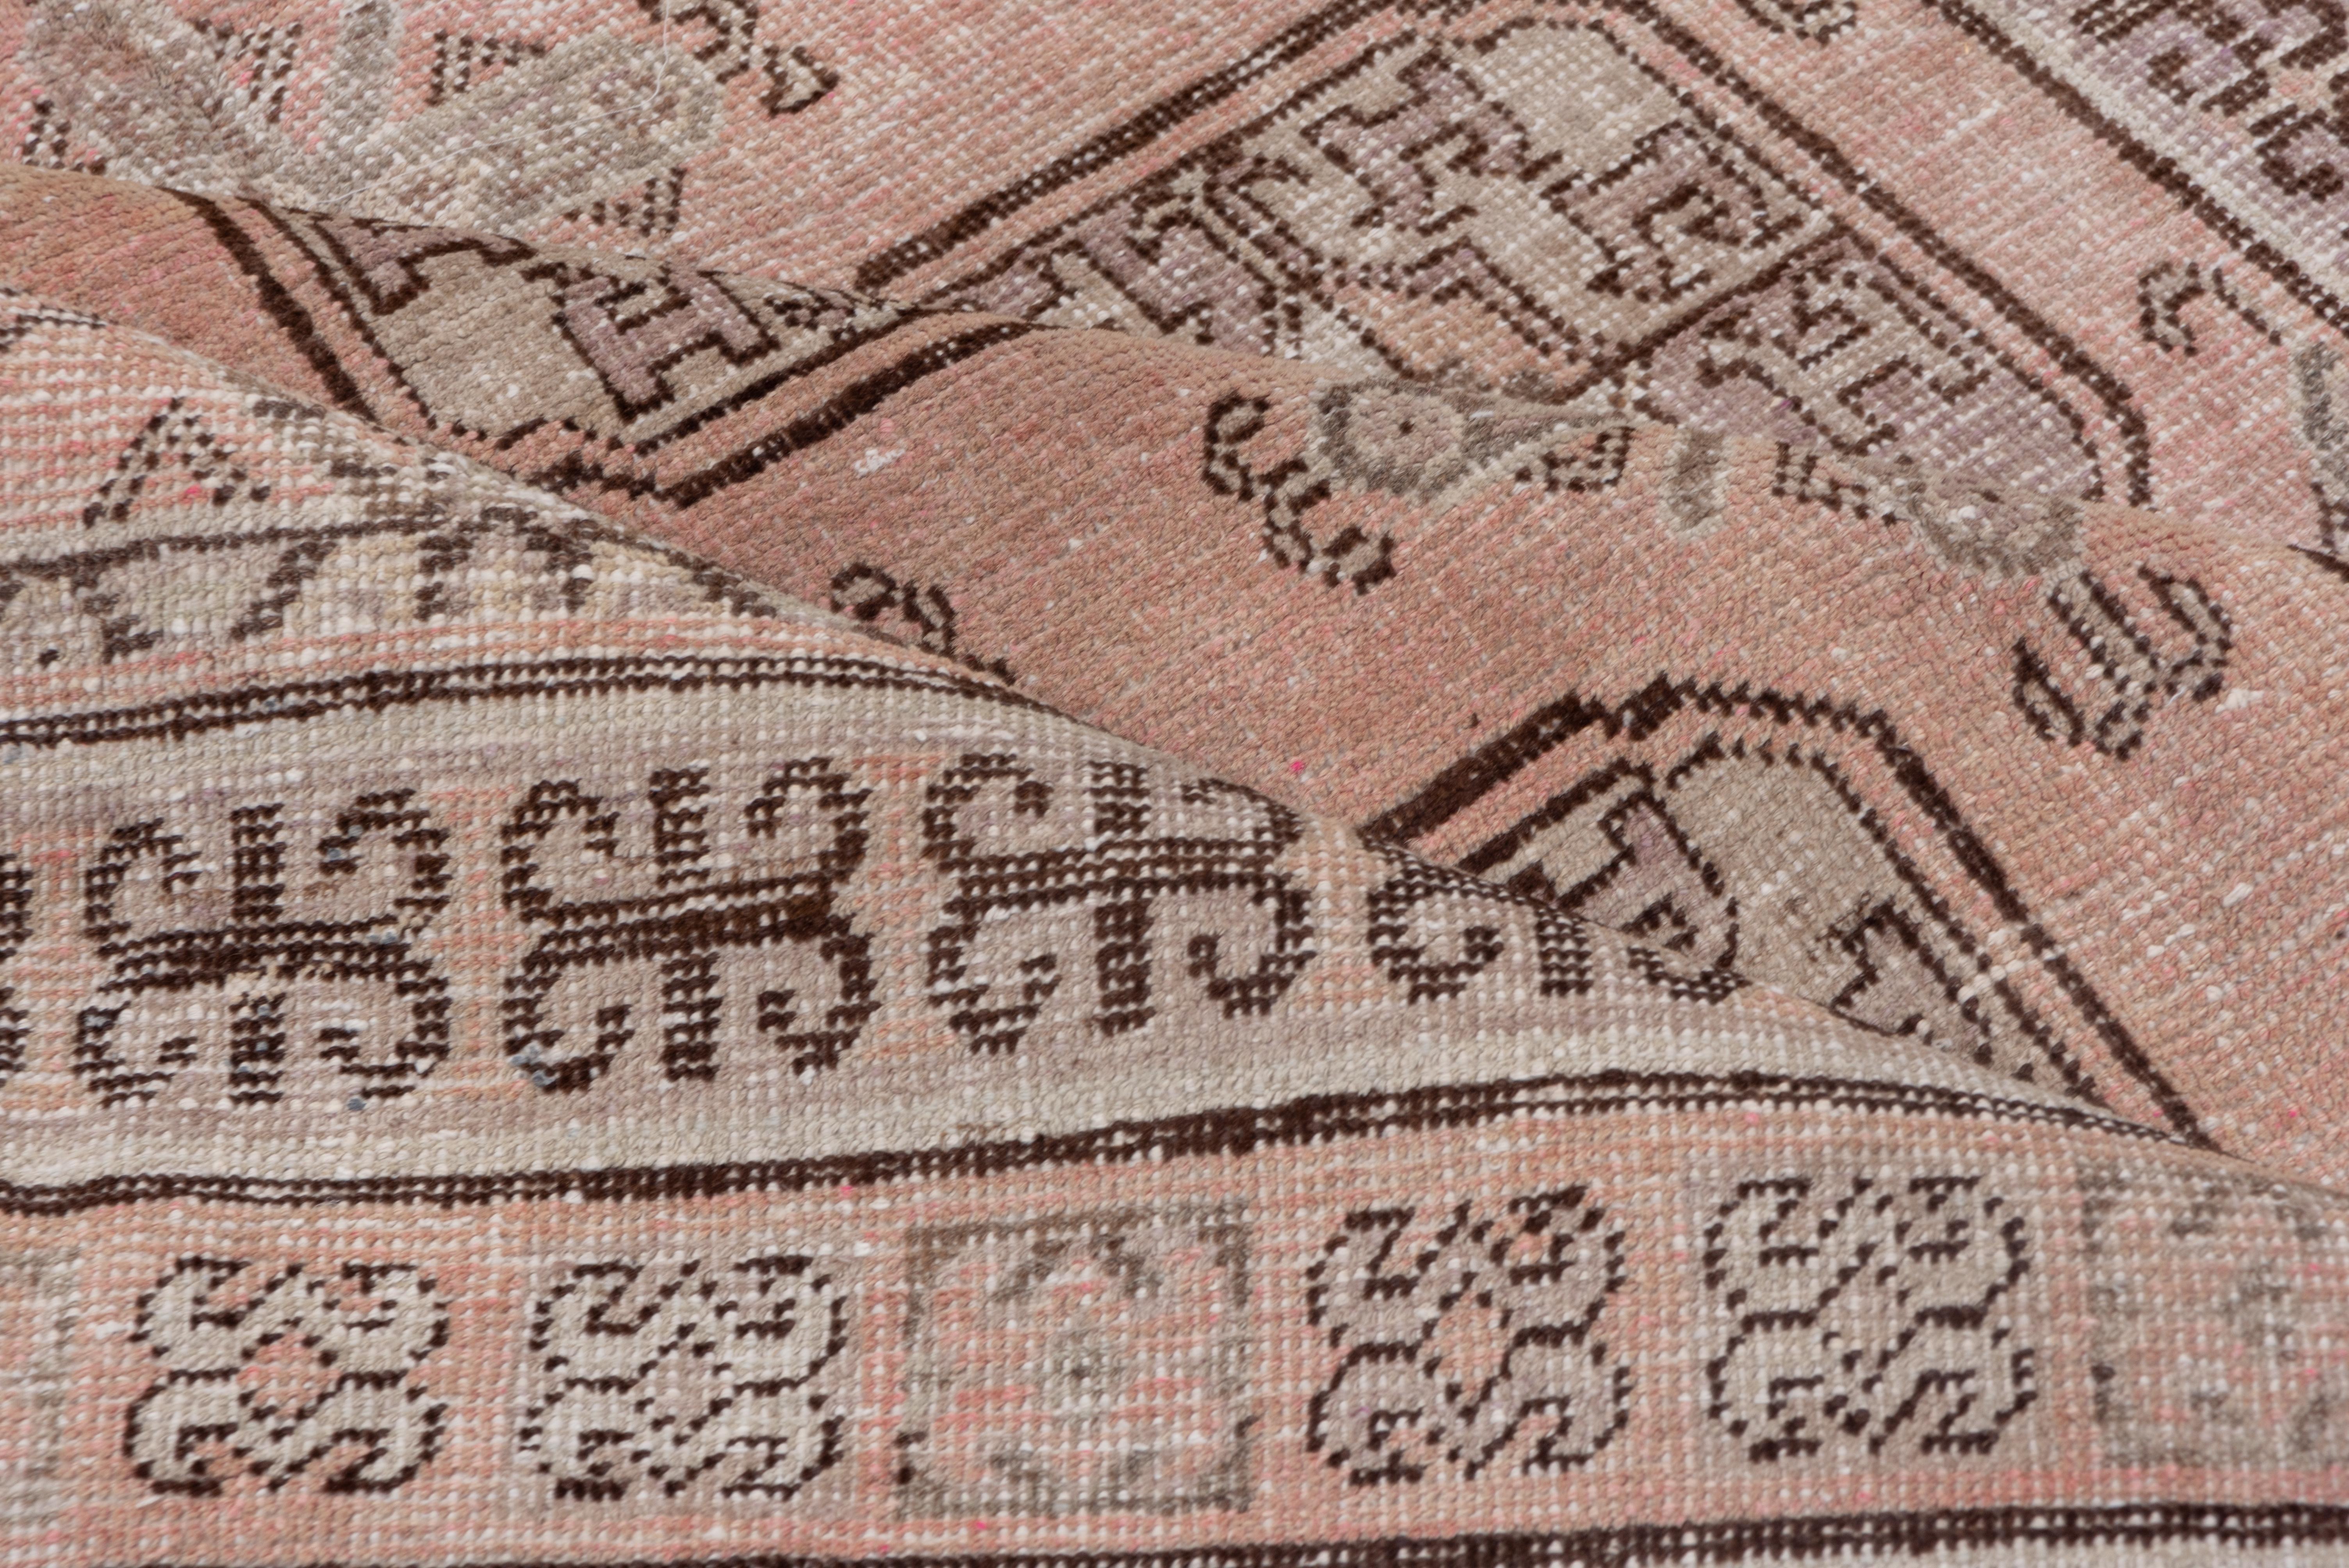 This east Turkestan town carpet shows a four-column layout of octagonal Turkmen-style Tauk Noska guls with chemche minor guls between on a straw-pink ground, set within double ram's Horn and other repeating Turkmen nomadic style borders.